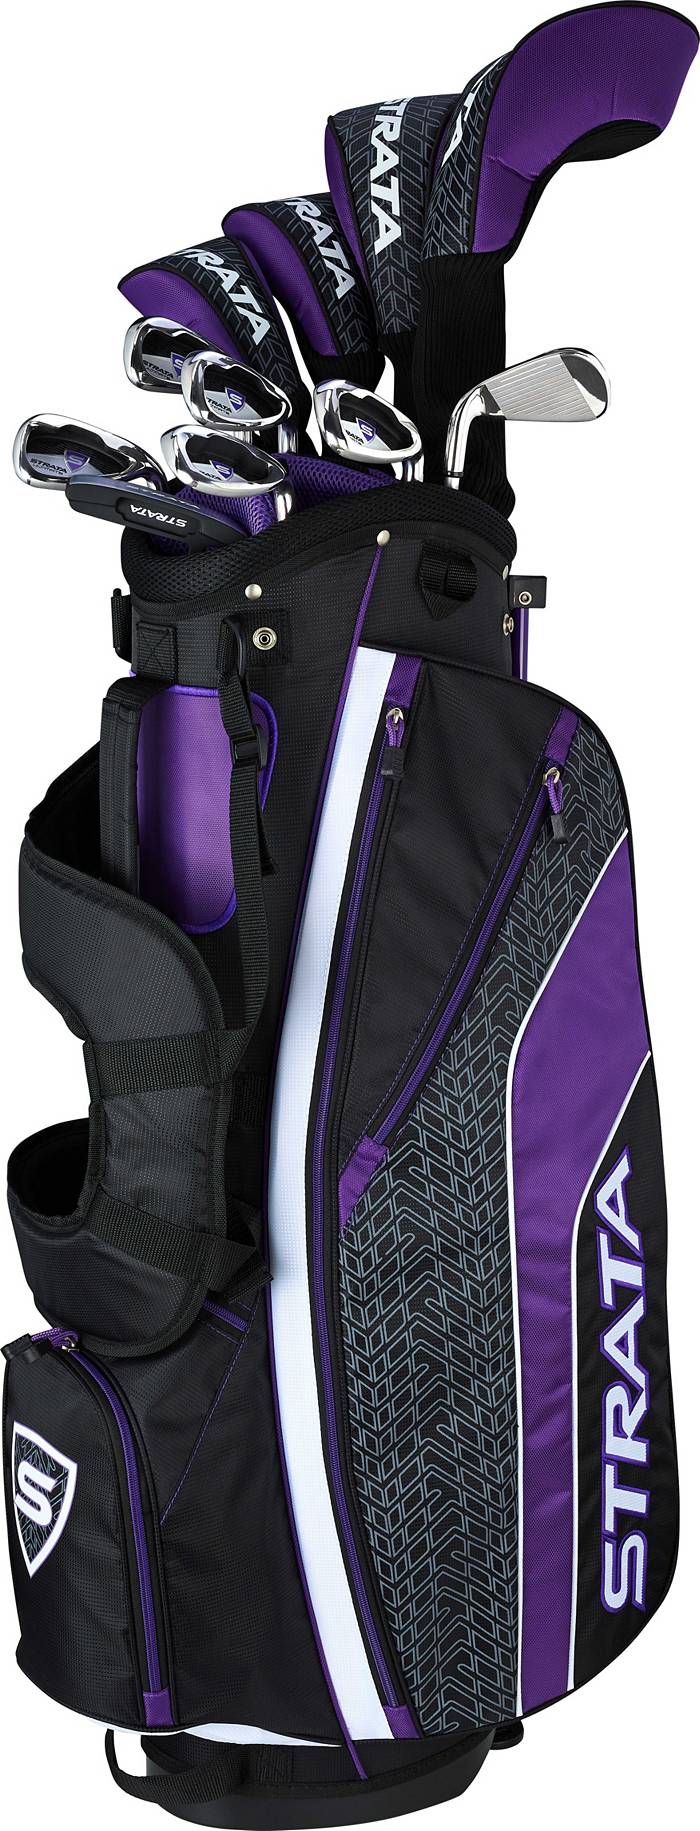 Strata Golf Strata Ultimate Piece Complete Set With Bag